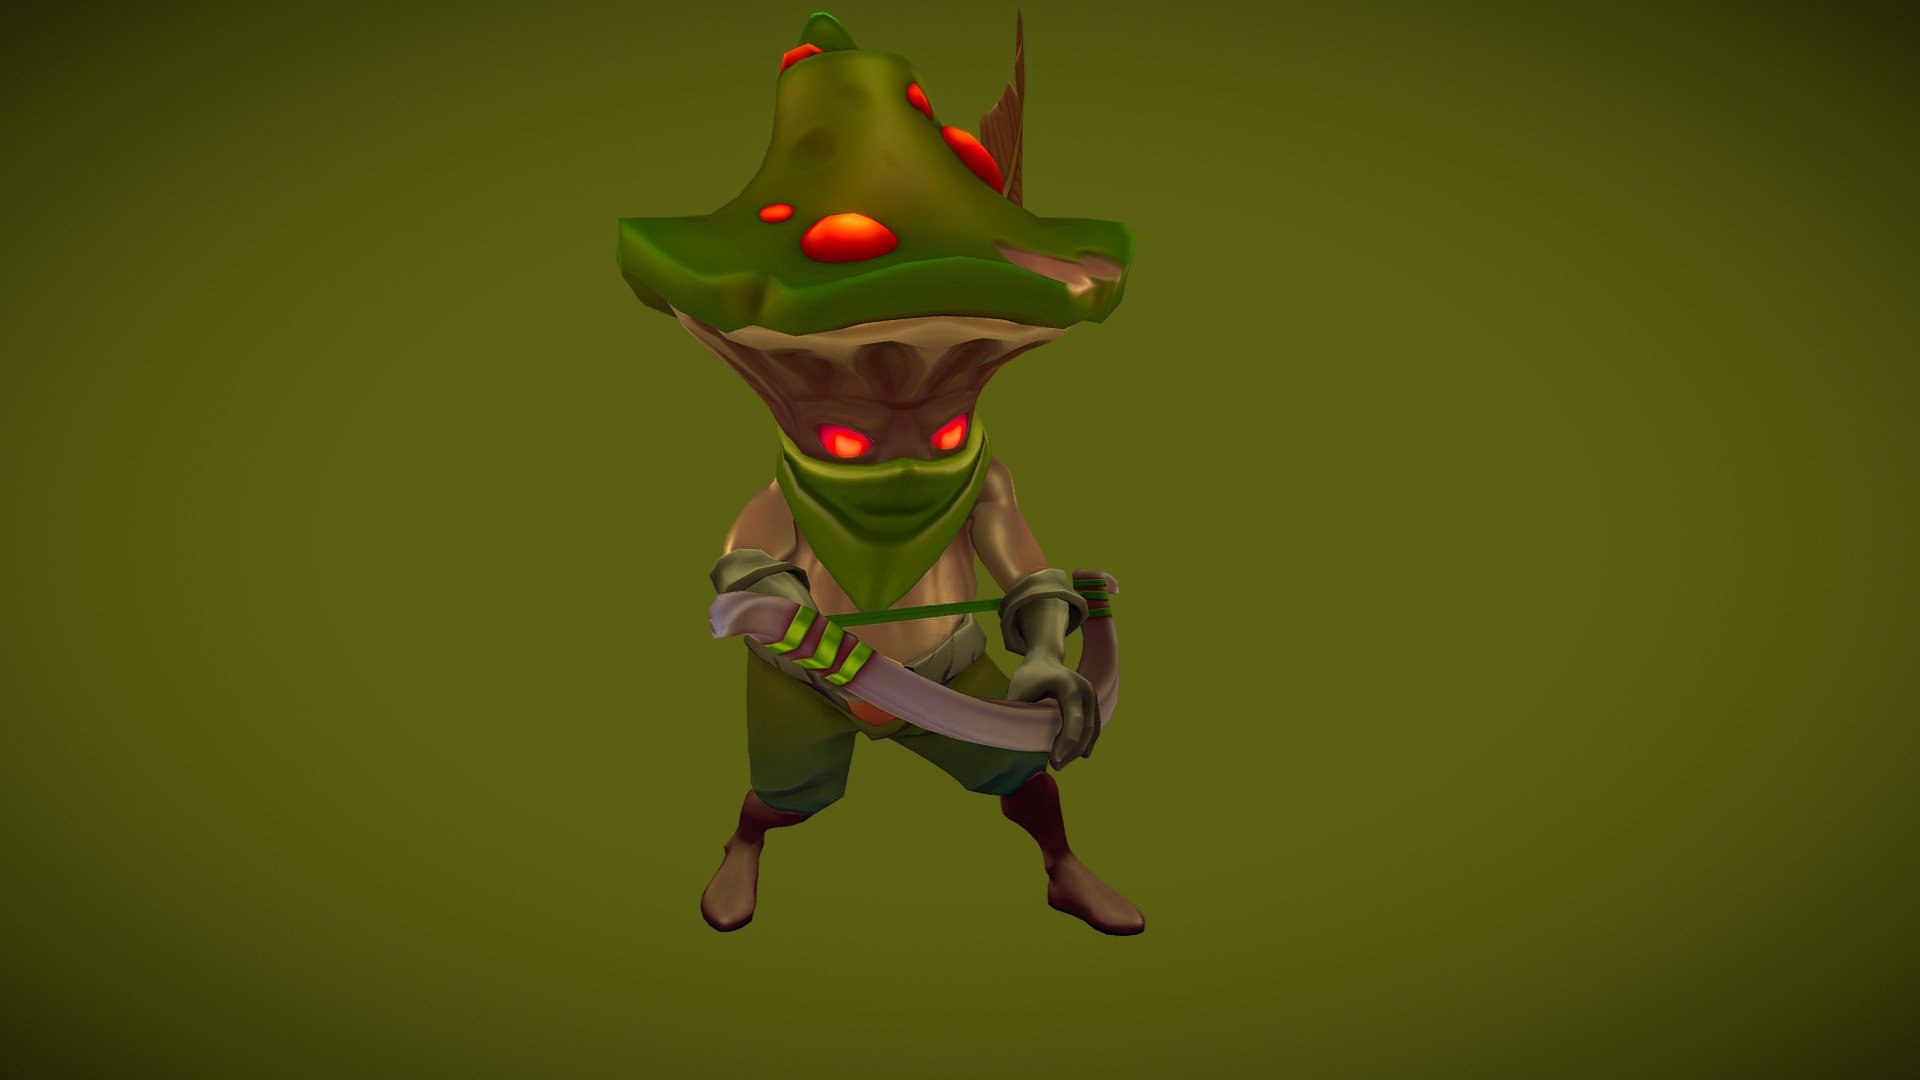 Stylized character for a project.

Software used: Zbrush, Autodesk Maya, Autodesk 3ds Max, Substance Painter - Stylized Mushroom Archer Minion - 3D model by N-hance Studio (@Malice6731) 3d model